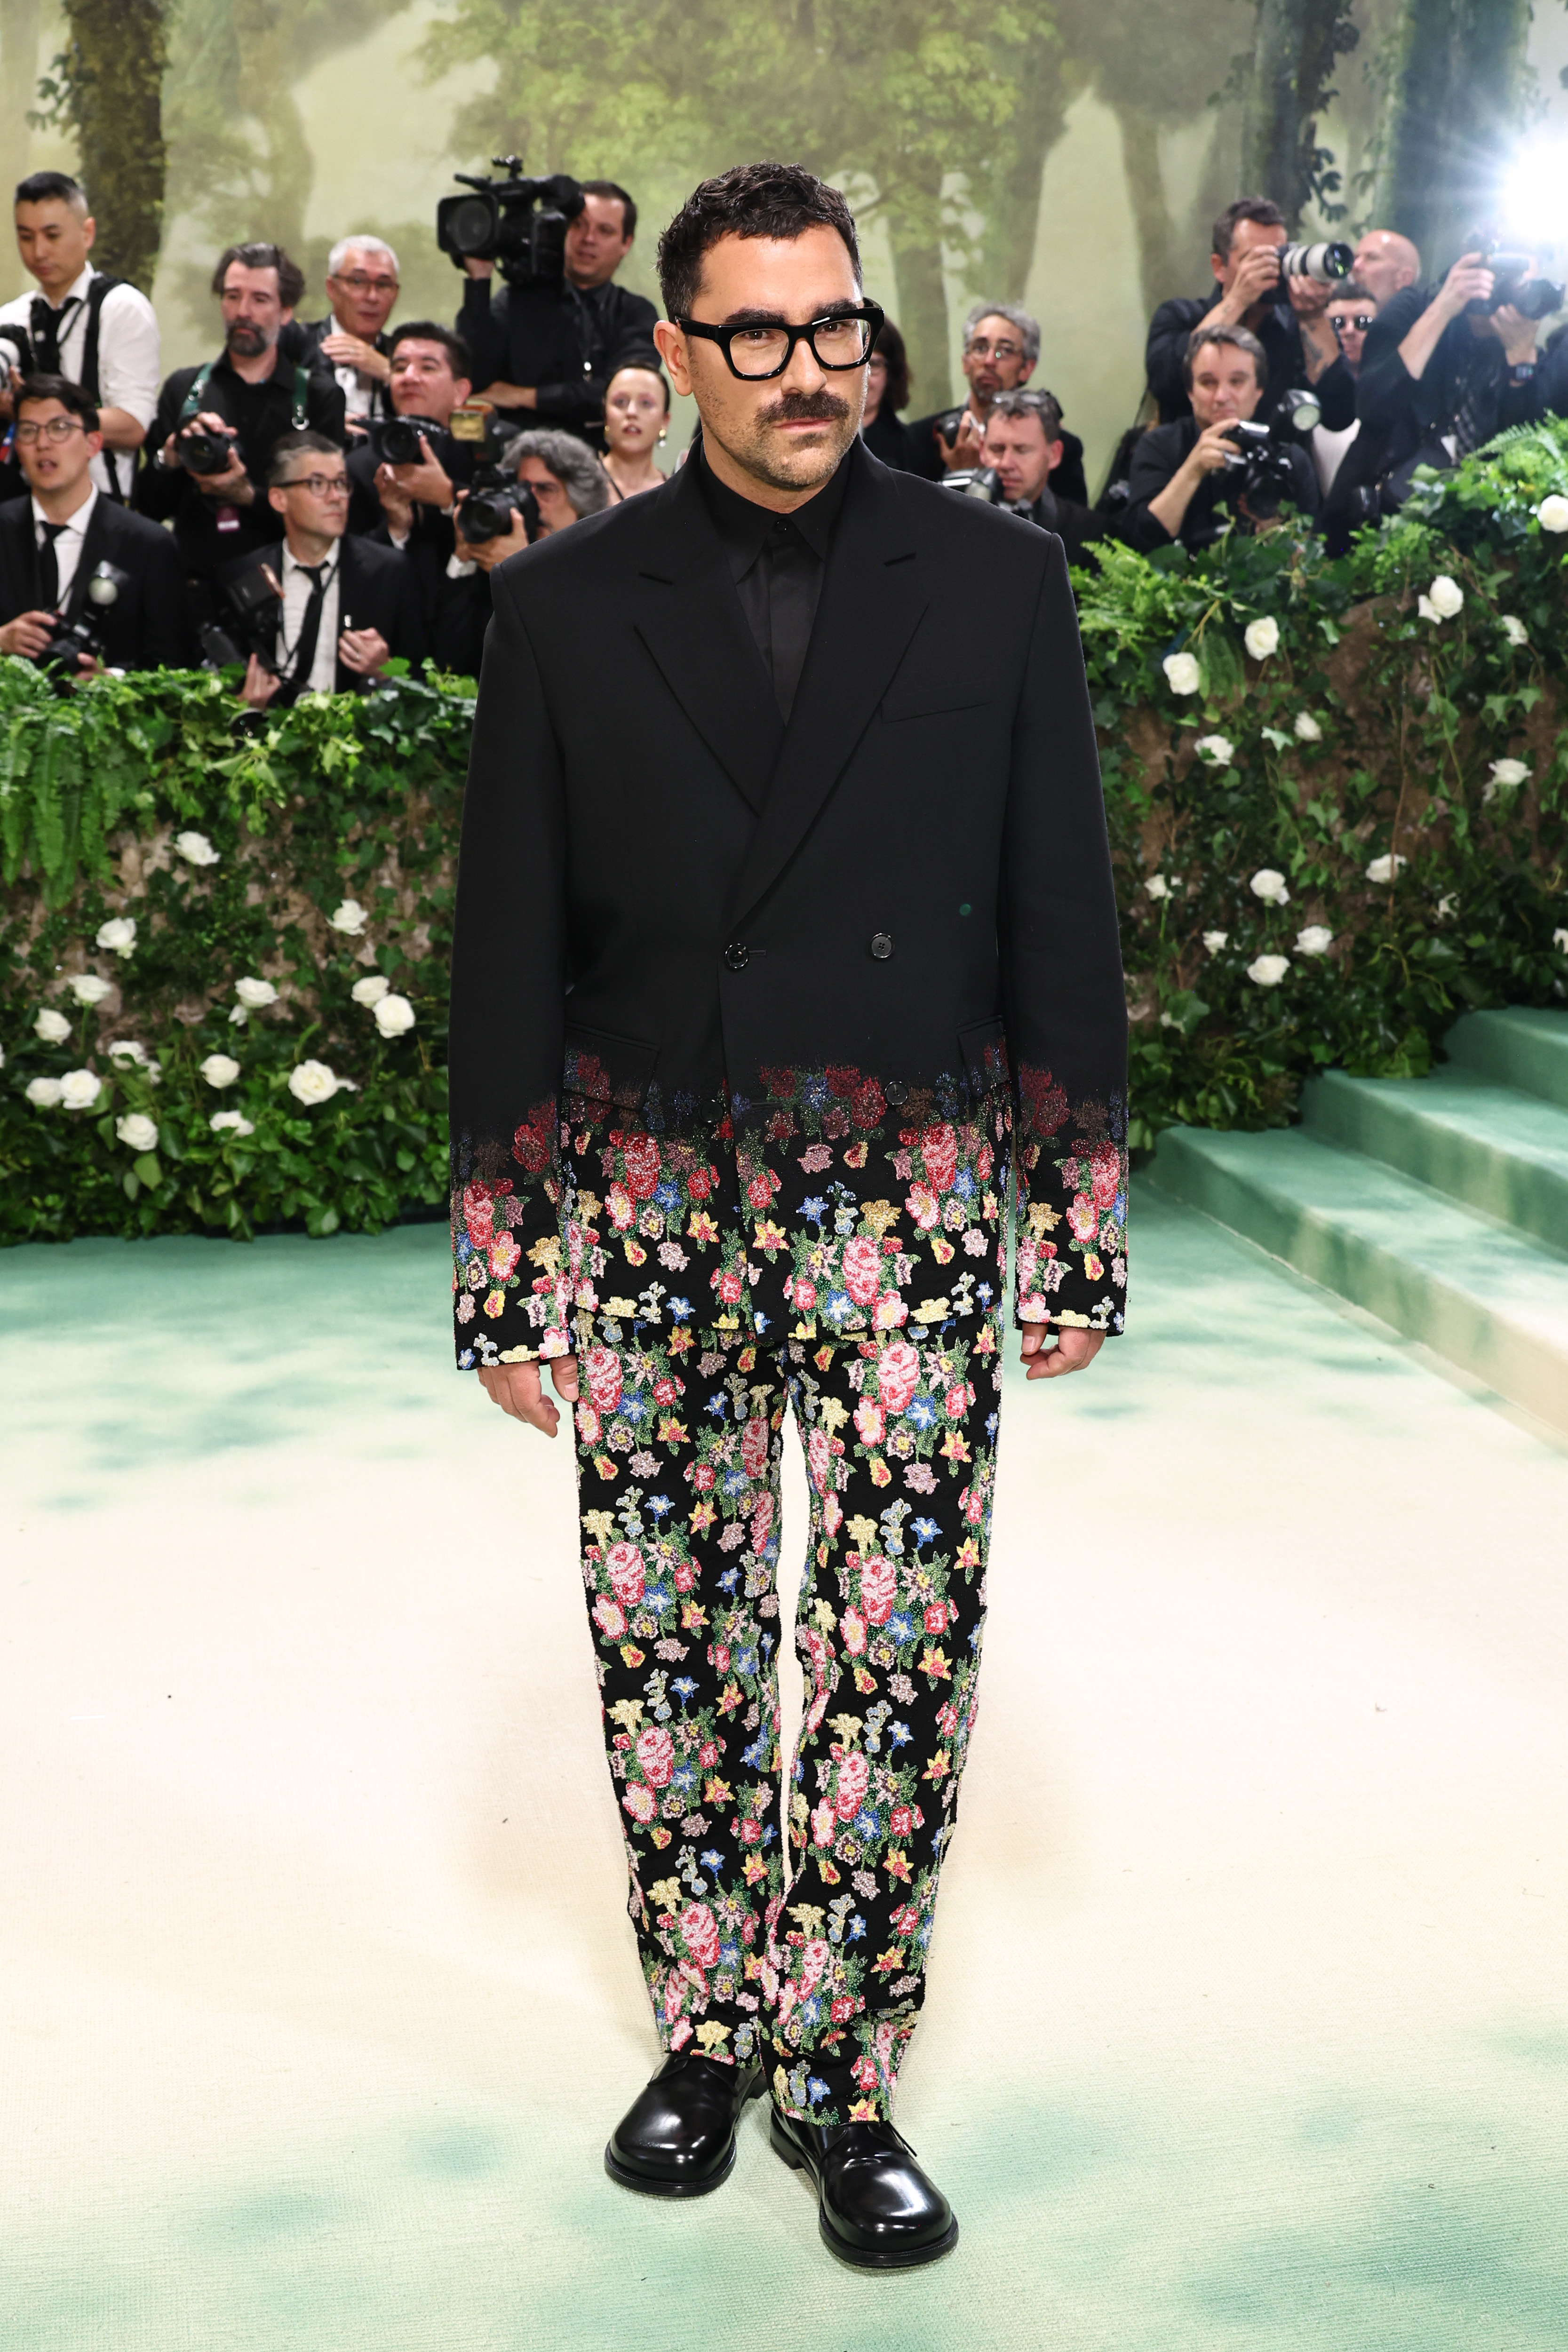 Dan Levy in floral suit at event with photographers in background